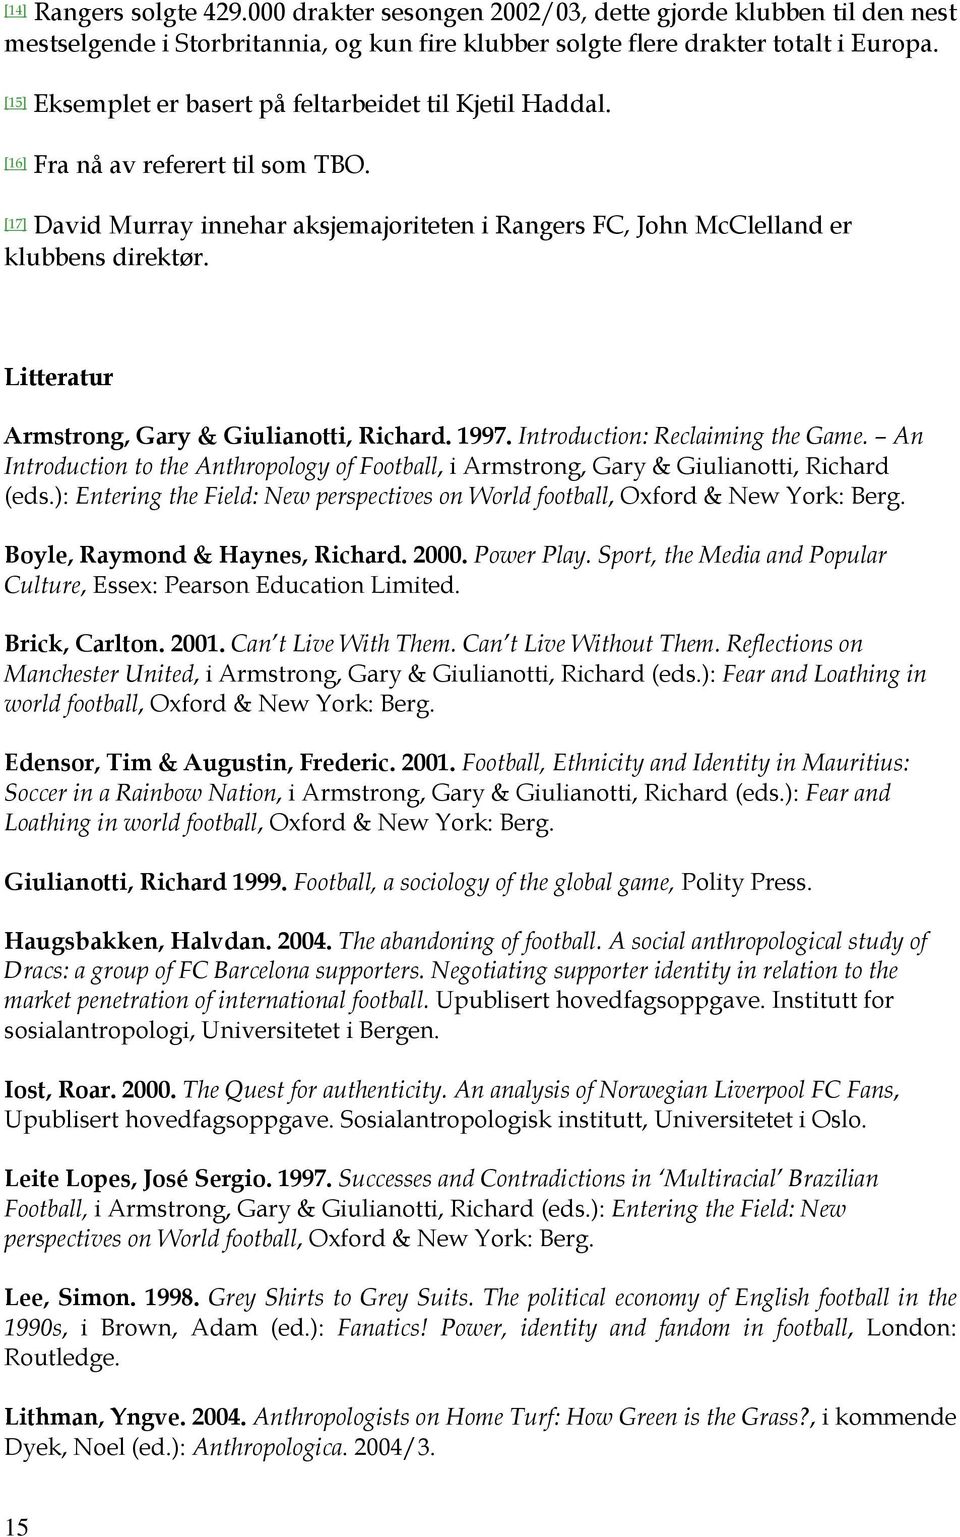 Litteratur Armstrong, Gary & Giulianotti, Richard. 1997. Introduction: Reclaiming the Game. An Introduction to the Anthropology of Football, i Armstrong, Gary & Giulianotti, Richard (eds.